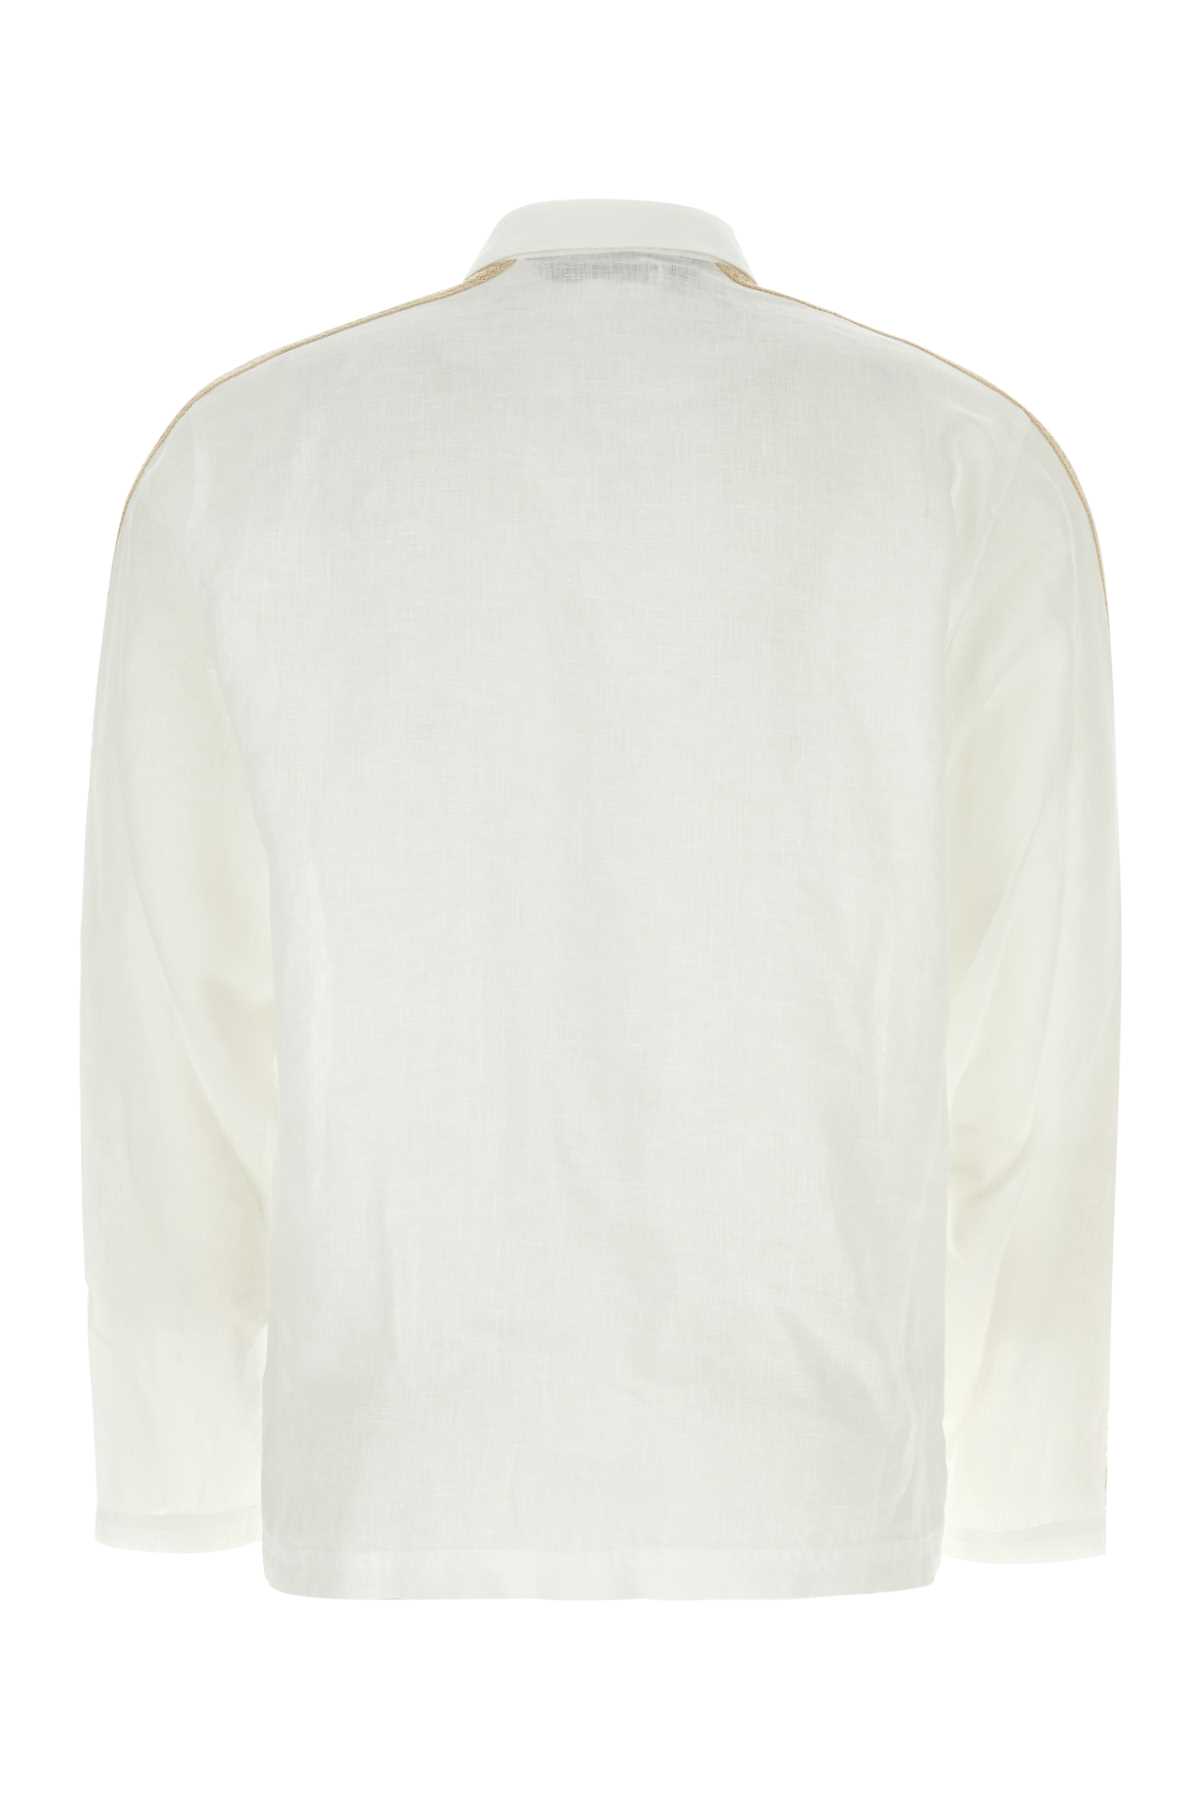 Palm Angels White Linen Shirt In Offwhite